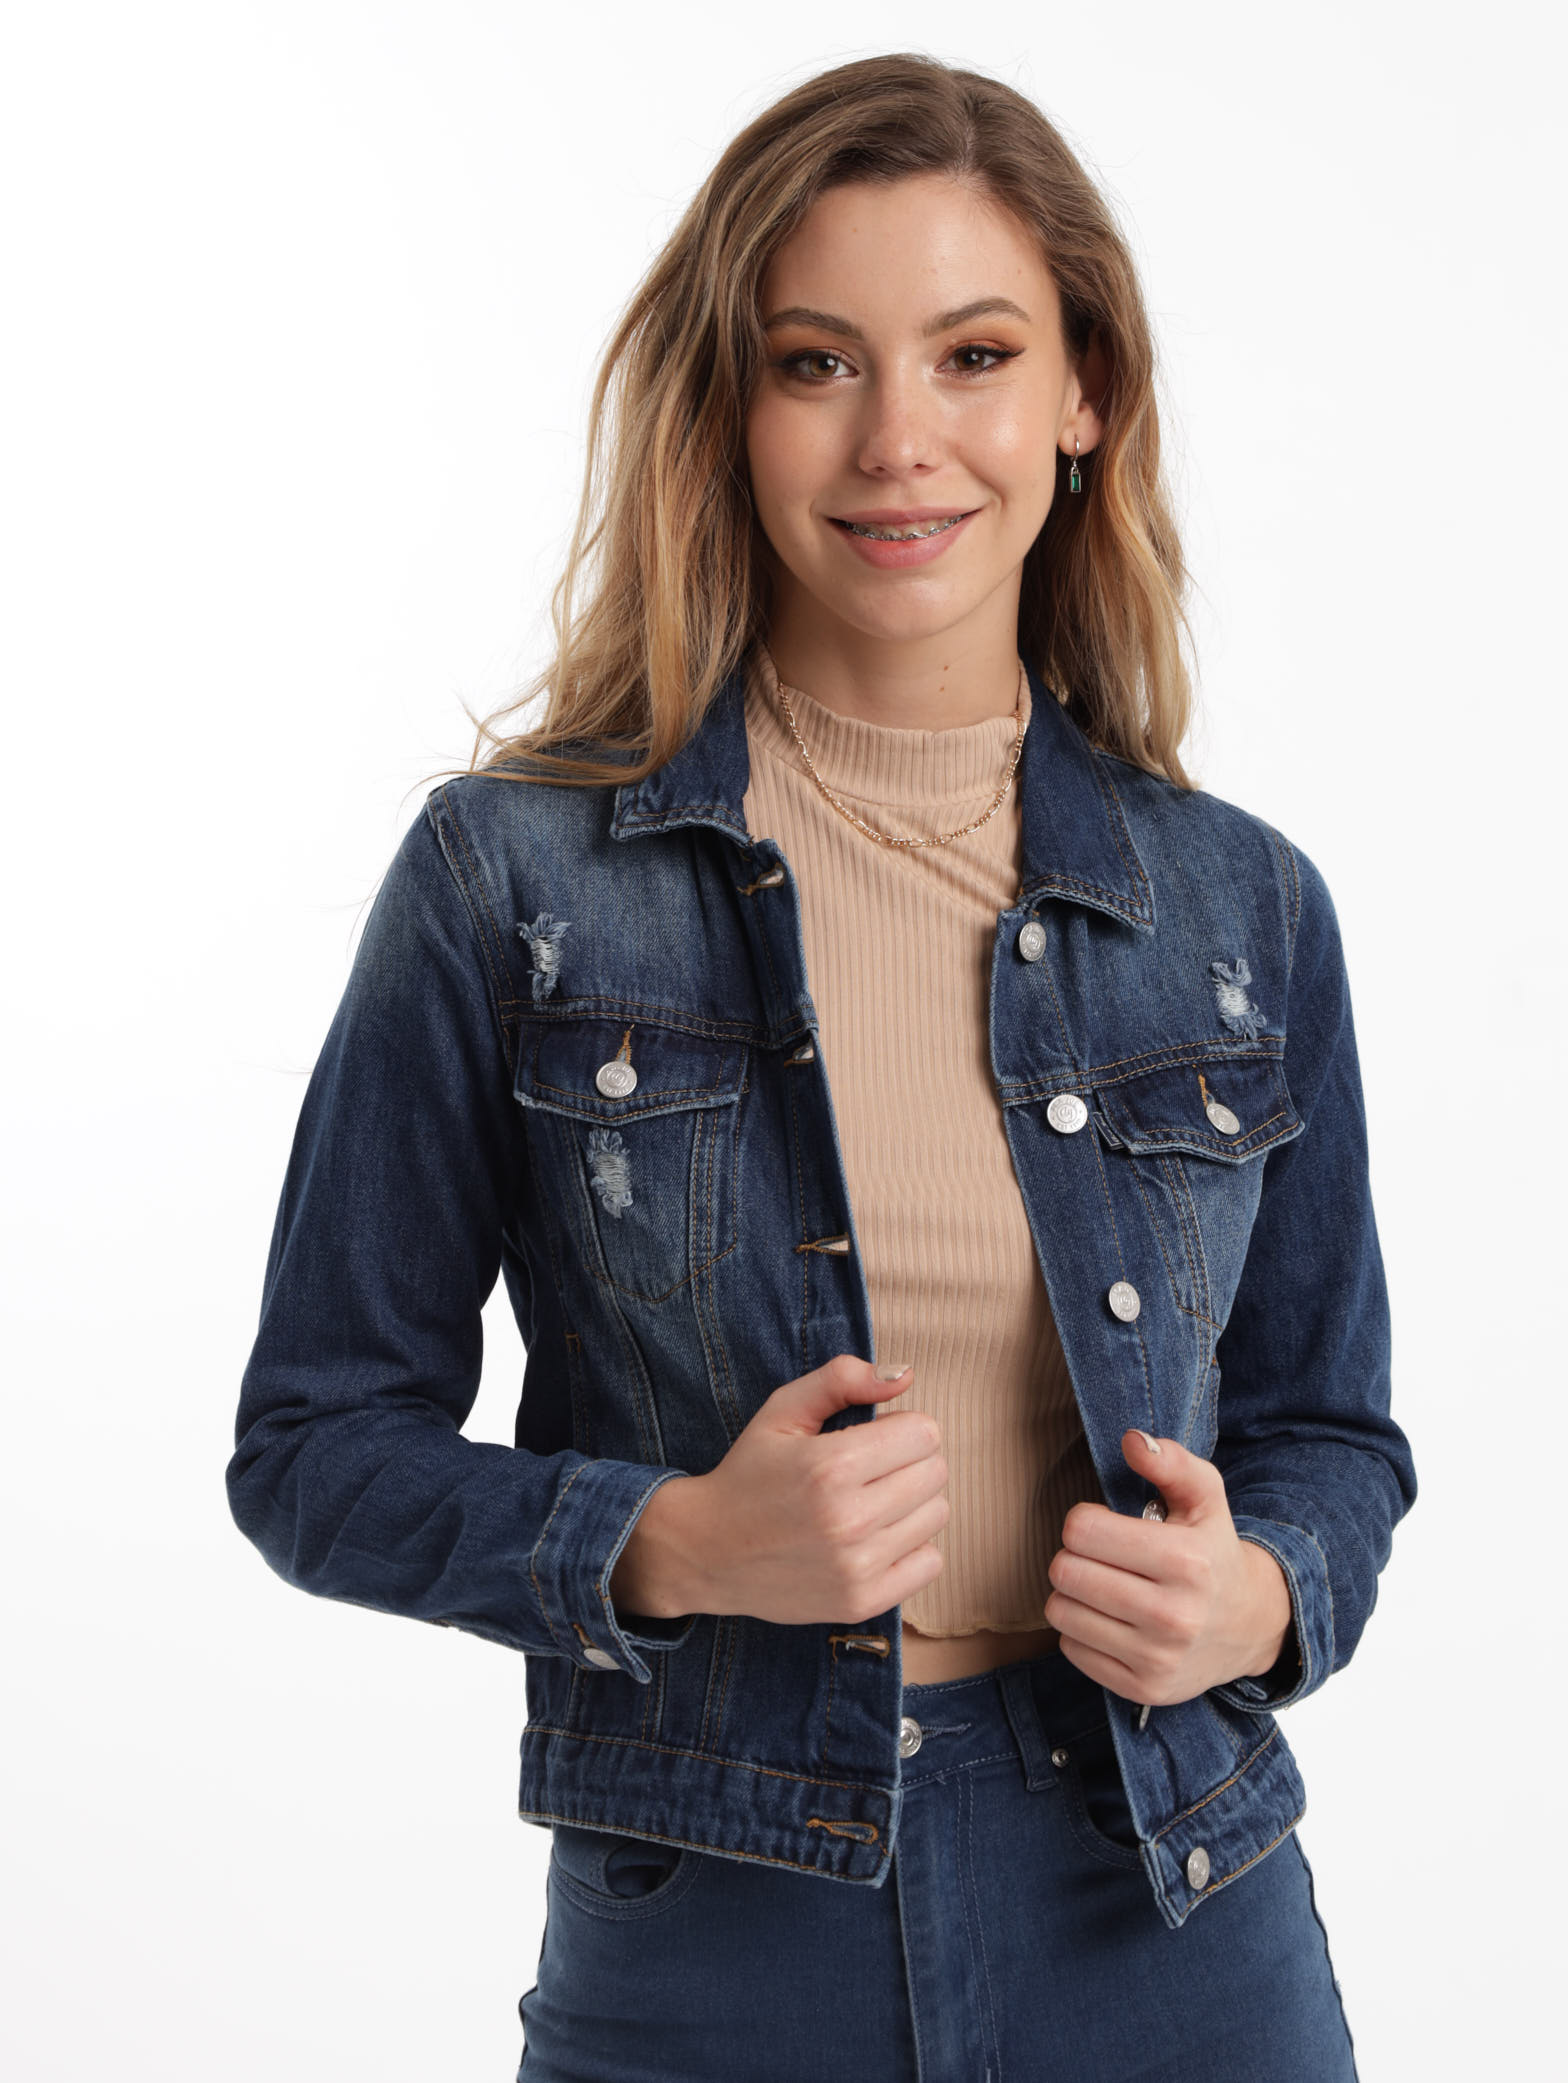 Buy Rosatro Women Denim Jackets Ladies Comfort Fit Button Turn-Down Jeans  Shirts Appliques with Pockets Overcoat Jacket (Blue,M) at Amazon.in